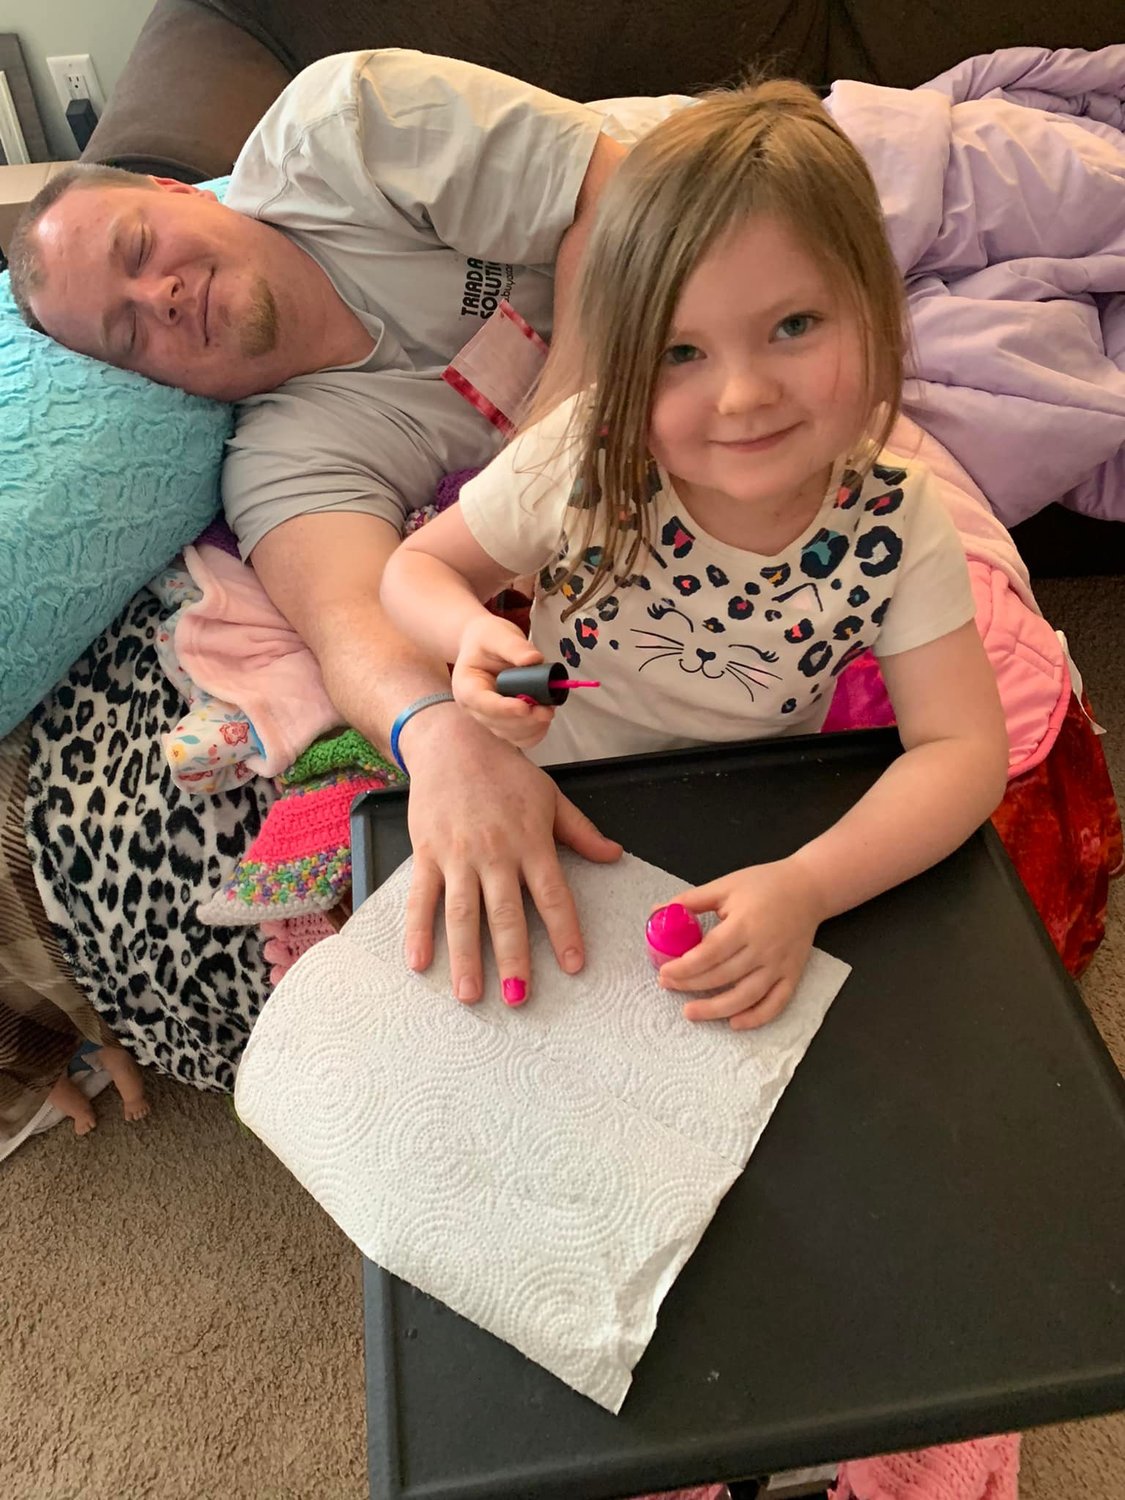 Kenzie Scoggins, 5, paints her father Dusty's nails. Kenzie loved doing makeovers and painting nails.